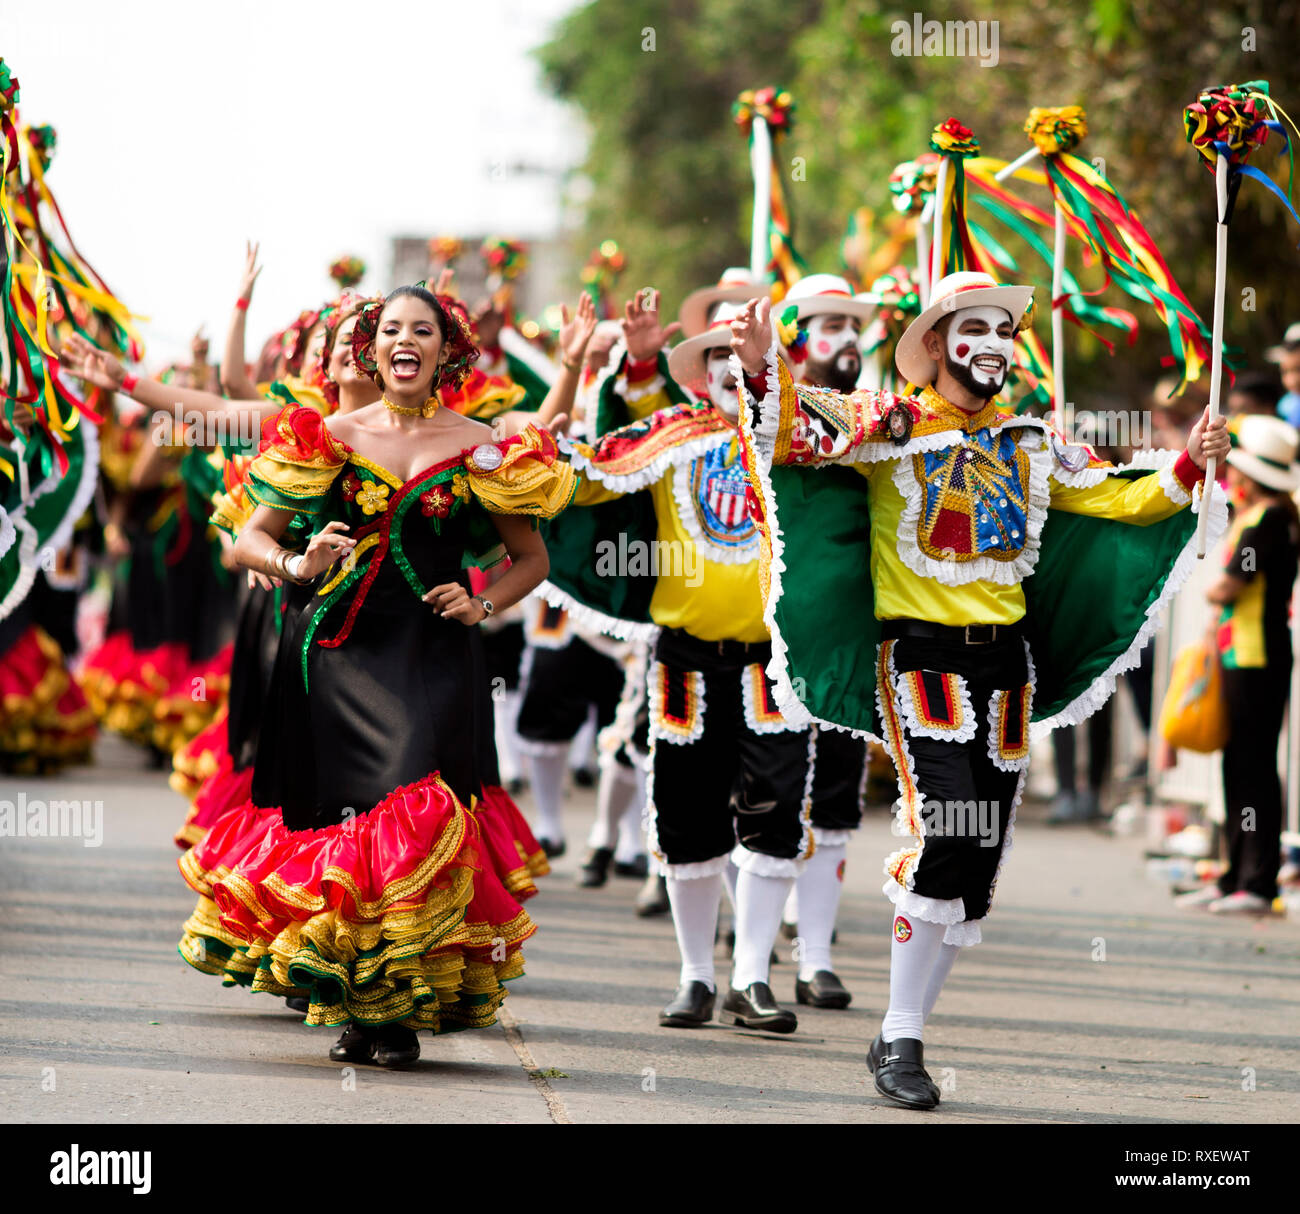 BARRANQUILLA, COLOMBIA - MARCH 03: A group of dancers perform during the 'Gran Parada de Tradicion y Folclor' as part of Barranquilla Carnival 2019 on Stock Photo